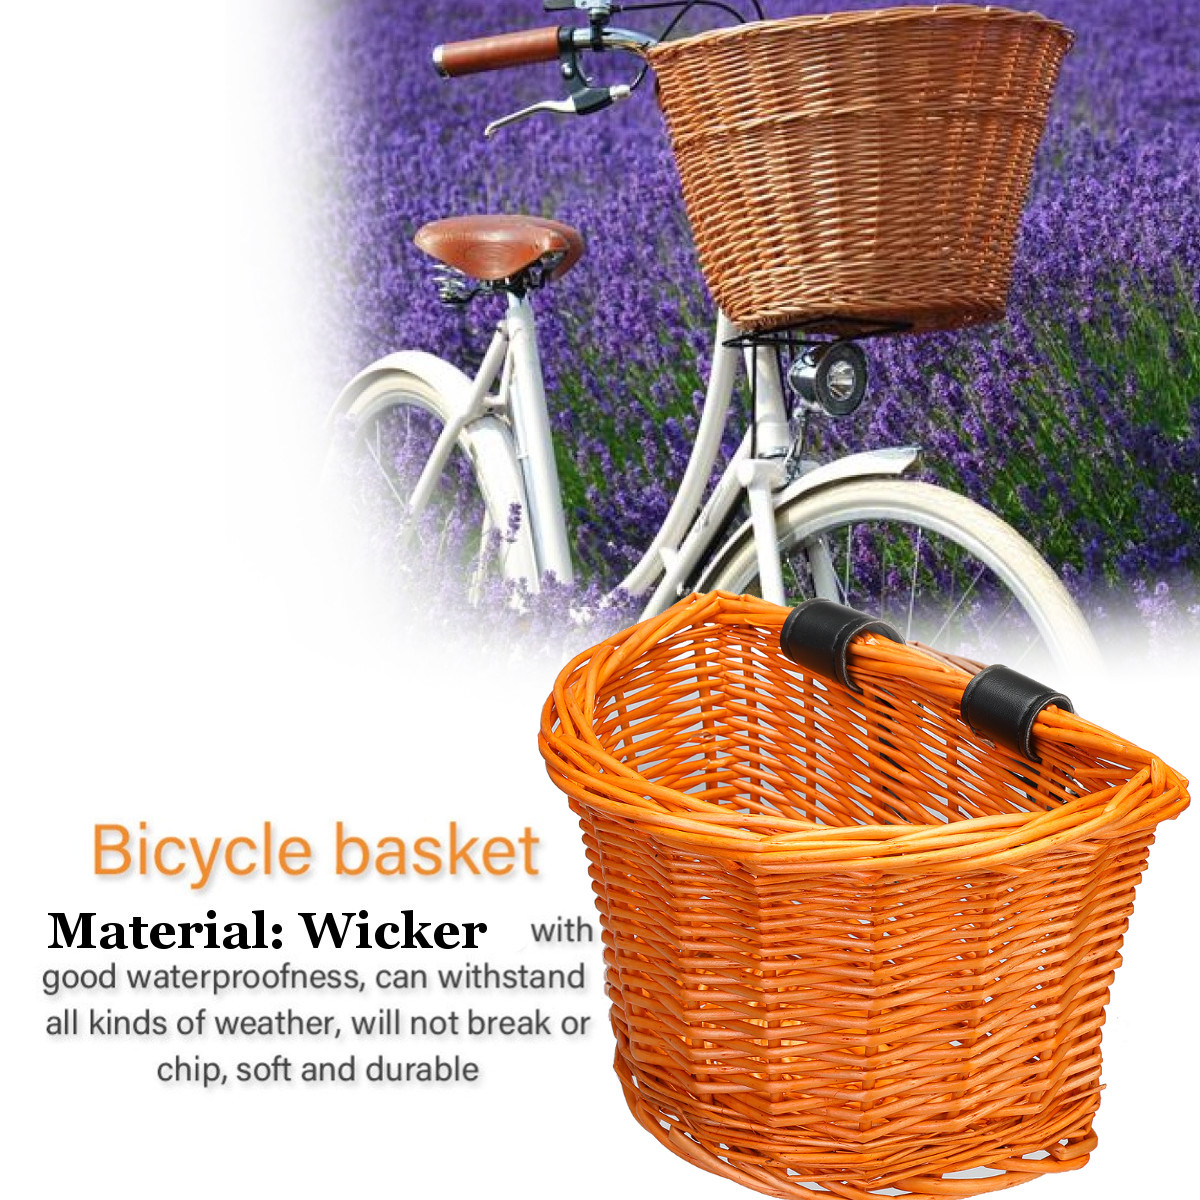 Rattan Wicker Bicycle Basket Vintage D-Shaped Hand Woven Art Wicker Bicycle Front Frame with Leather Straps Retro Rattan Cycling Front Bags 